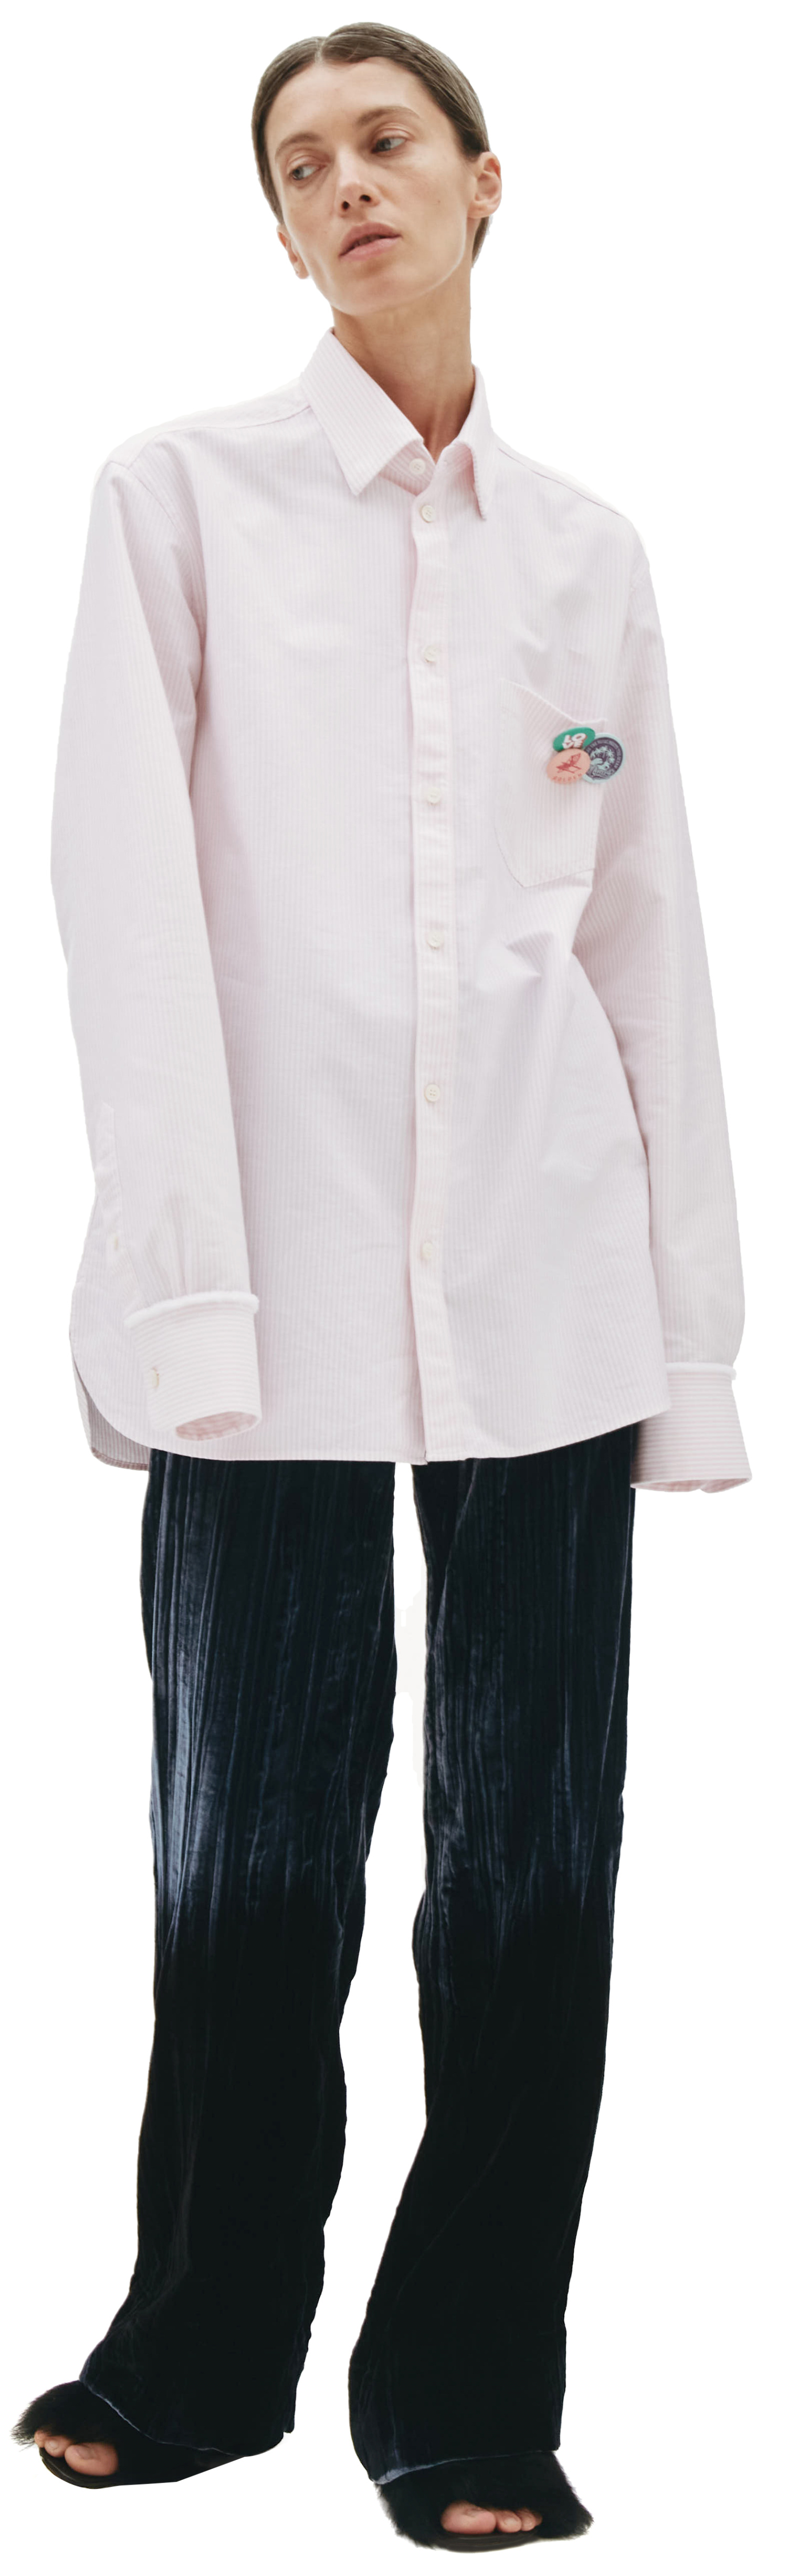 Golden Goose Oversized stripes shirt with pins